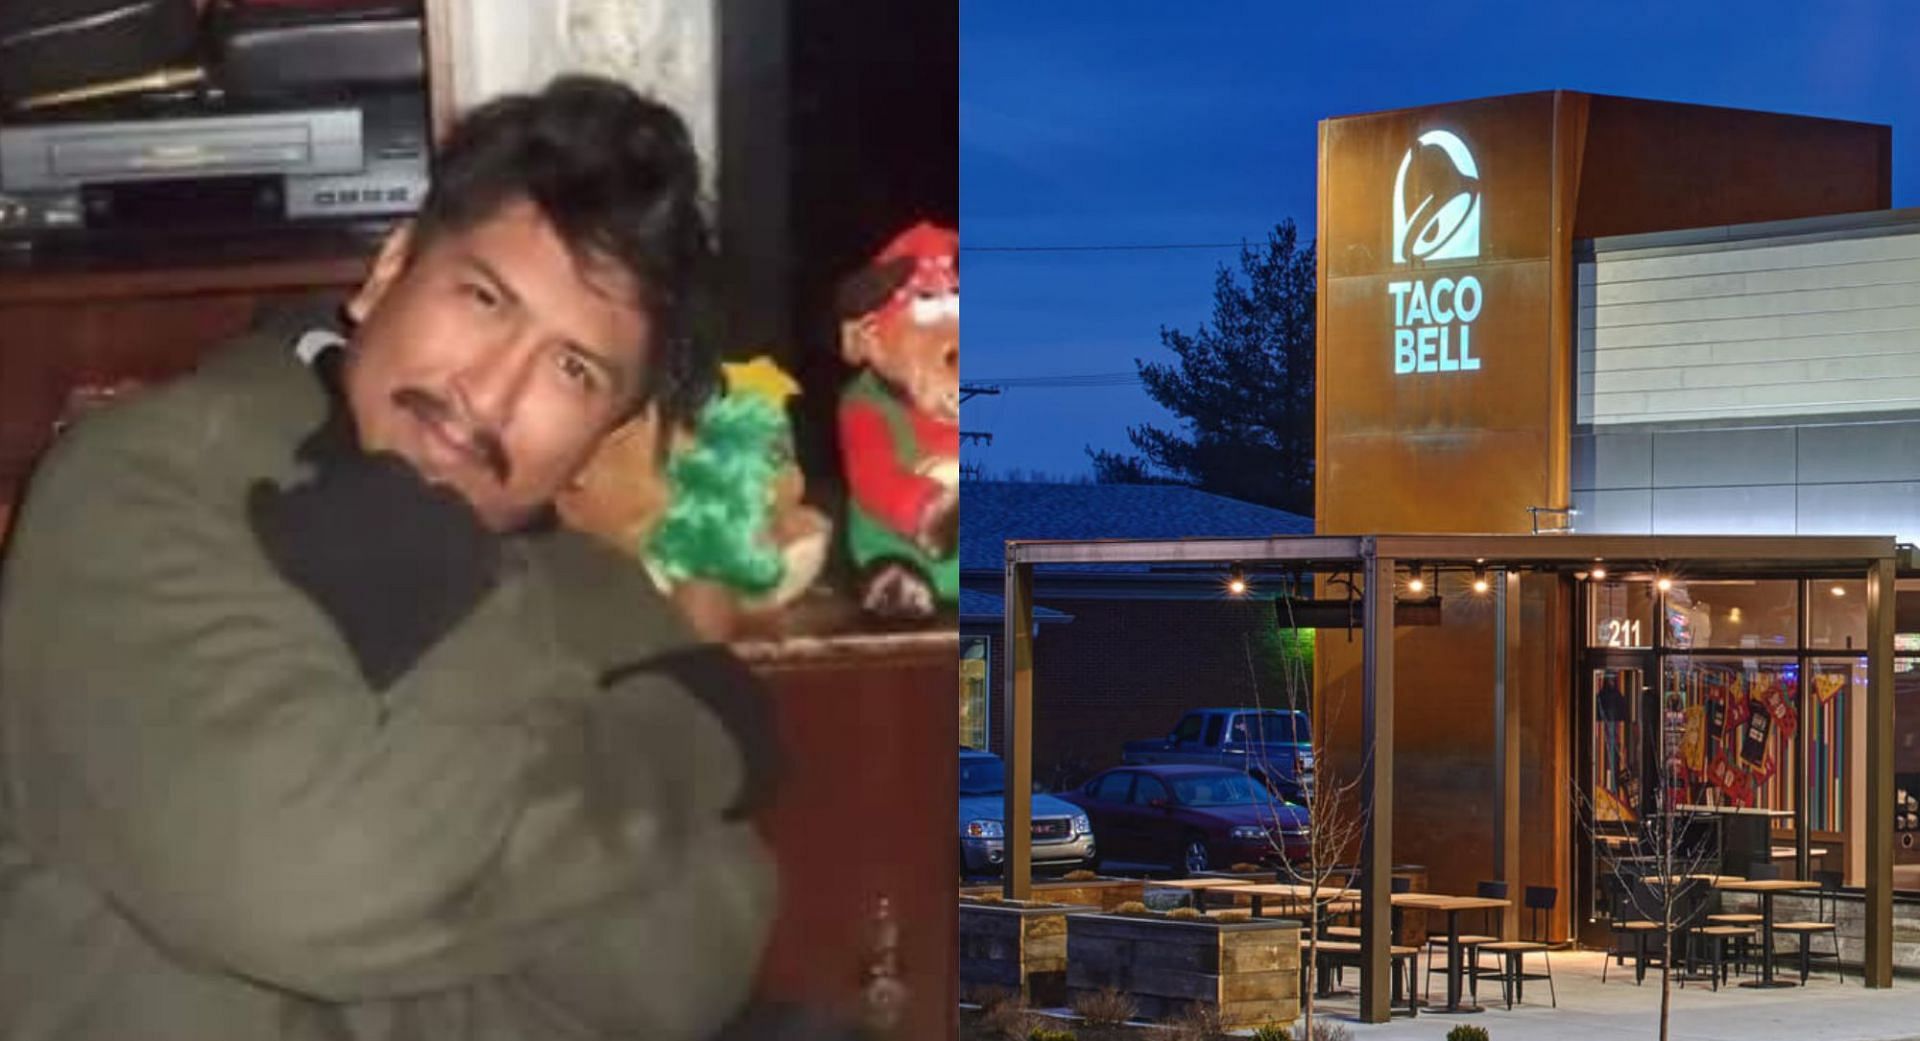 Taco Bell employee Alejandro Garcia was shot dead by a customer (Image via GoFundMe and Taco Bell)